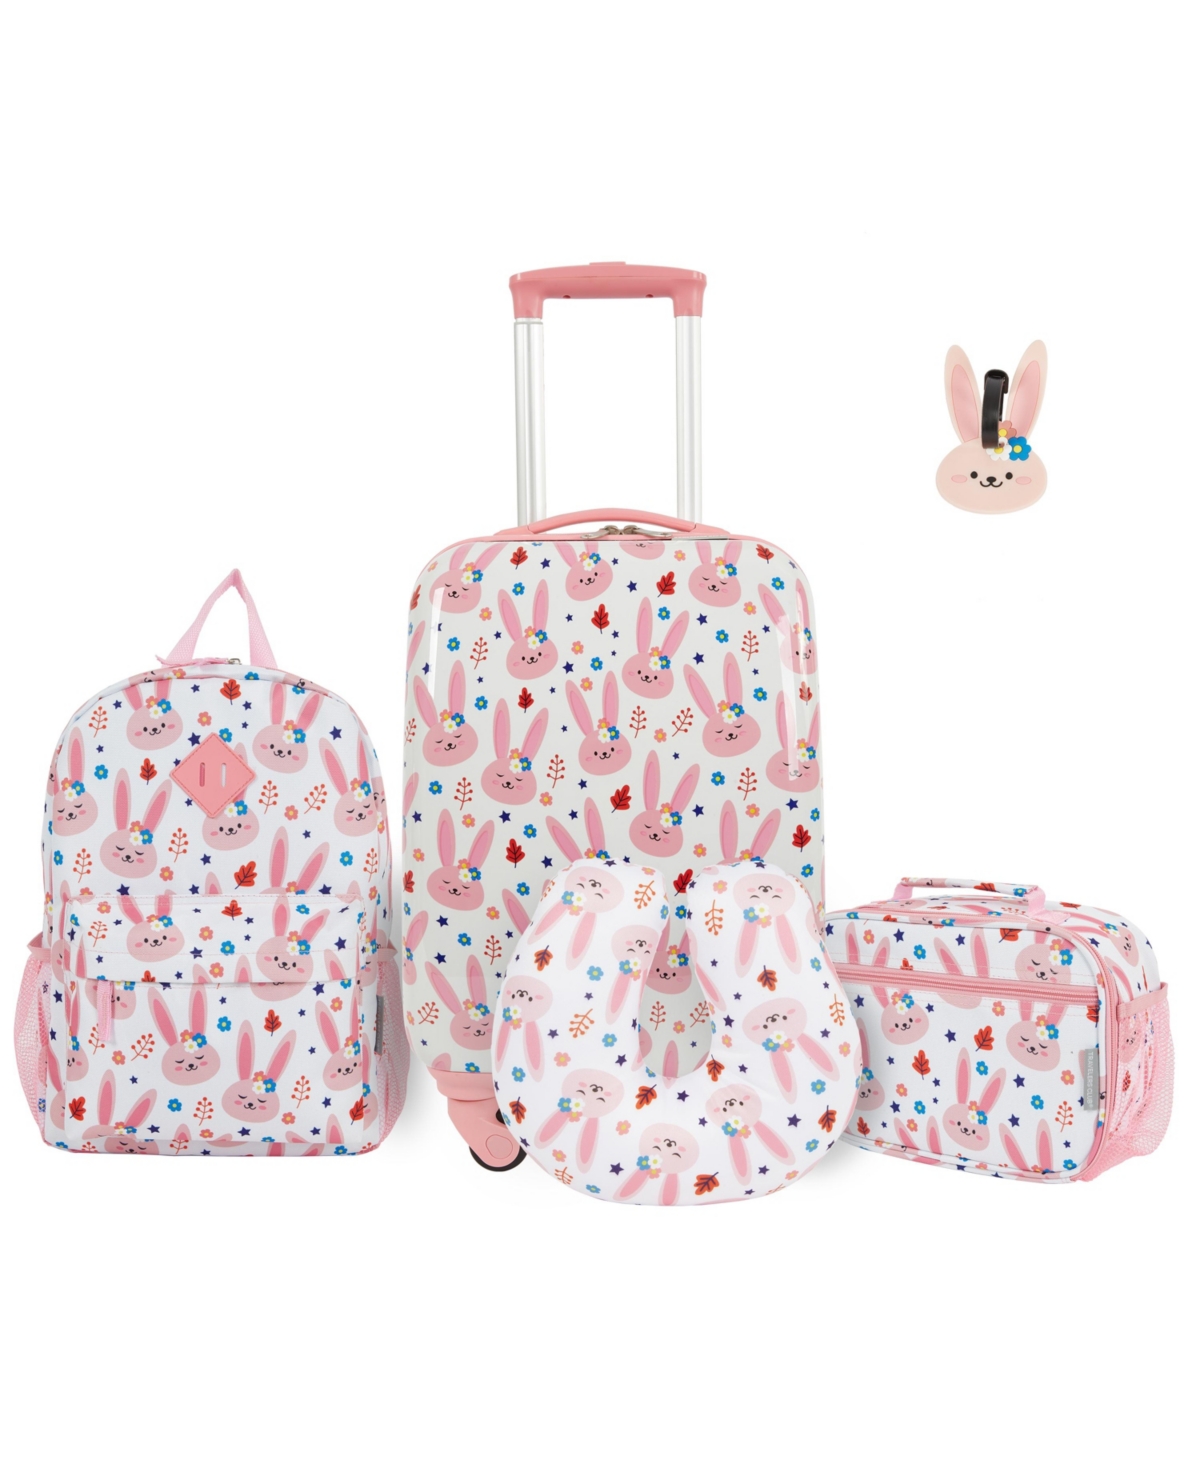 Travelers Club Kid's Hard Side Carry-on Spinner 5 Piece Luggage Set In Bunny